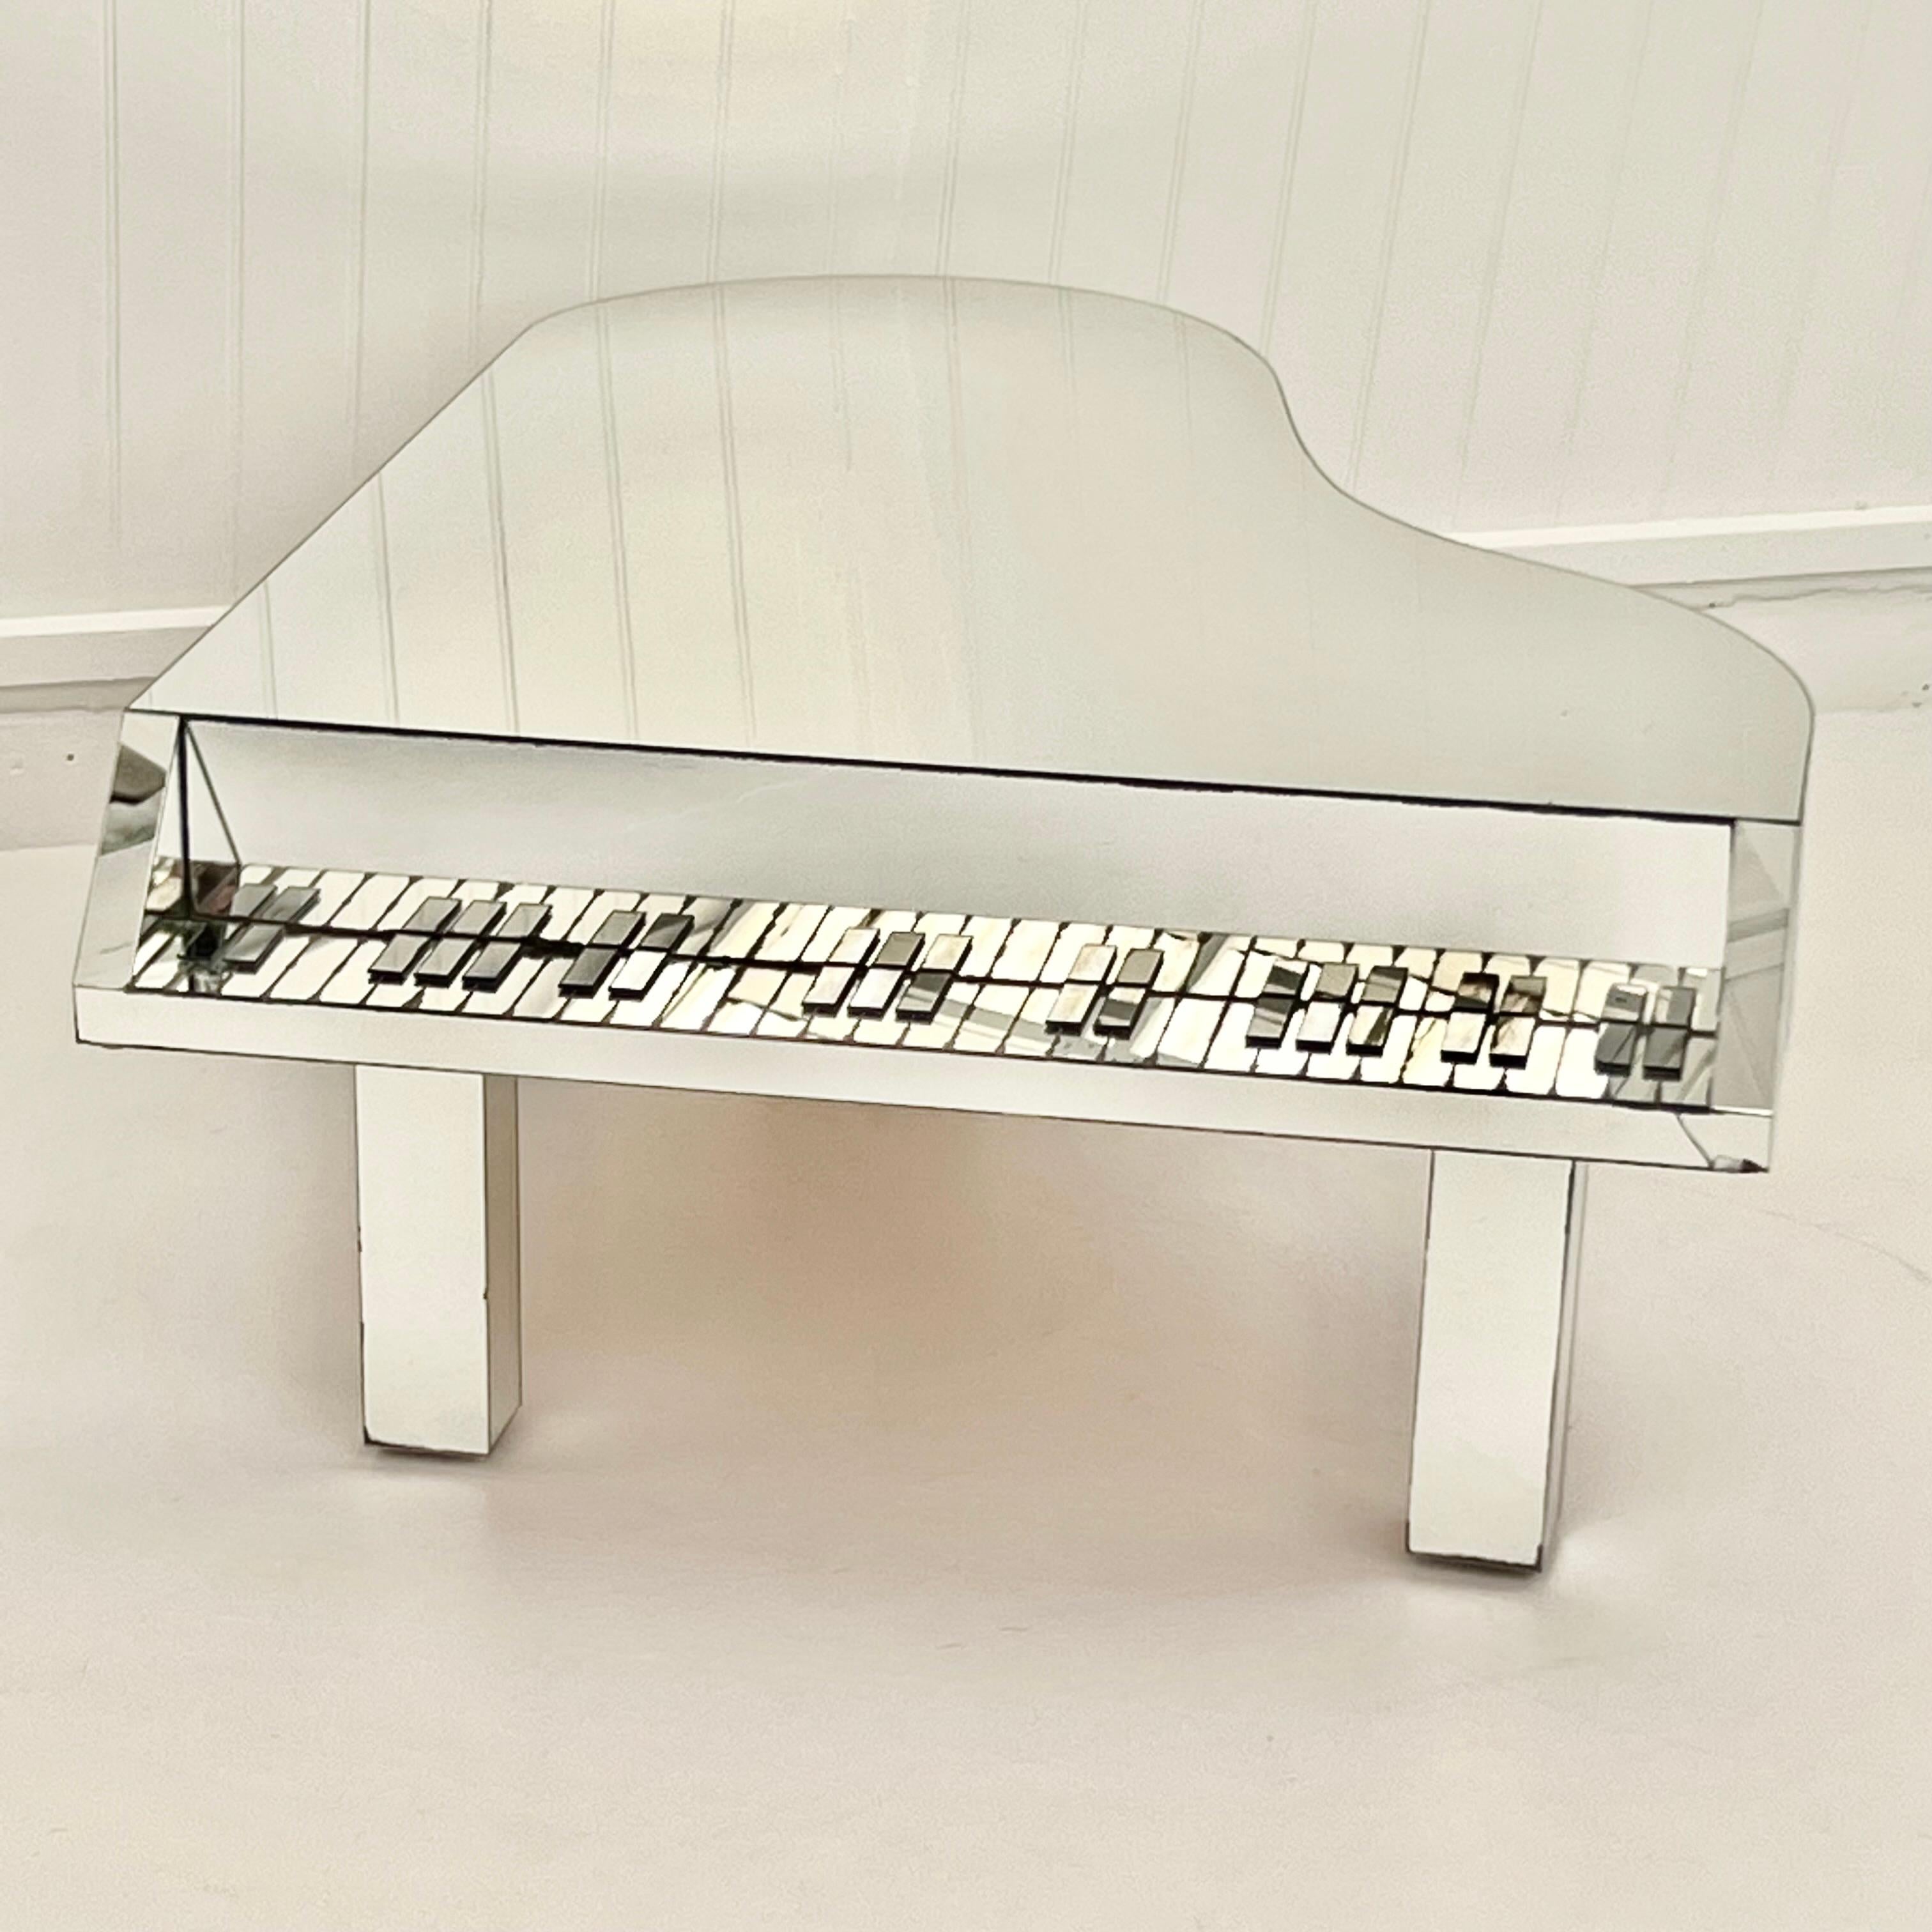 Mid-Century Modern Mirrored Piano Coffee Table, circa 1970s For Sale